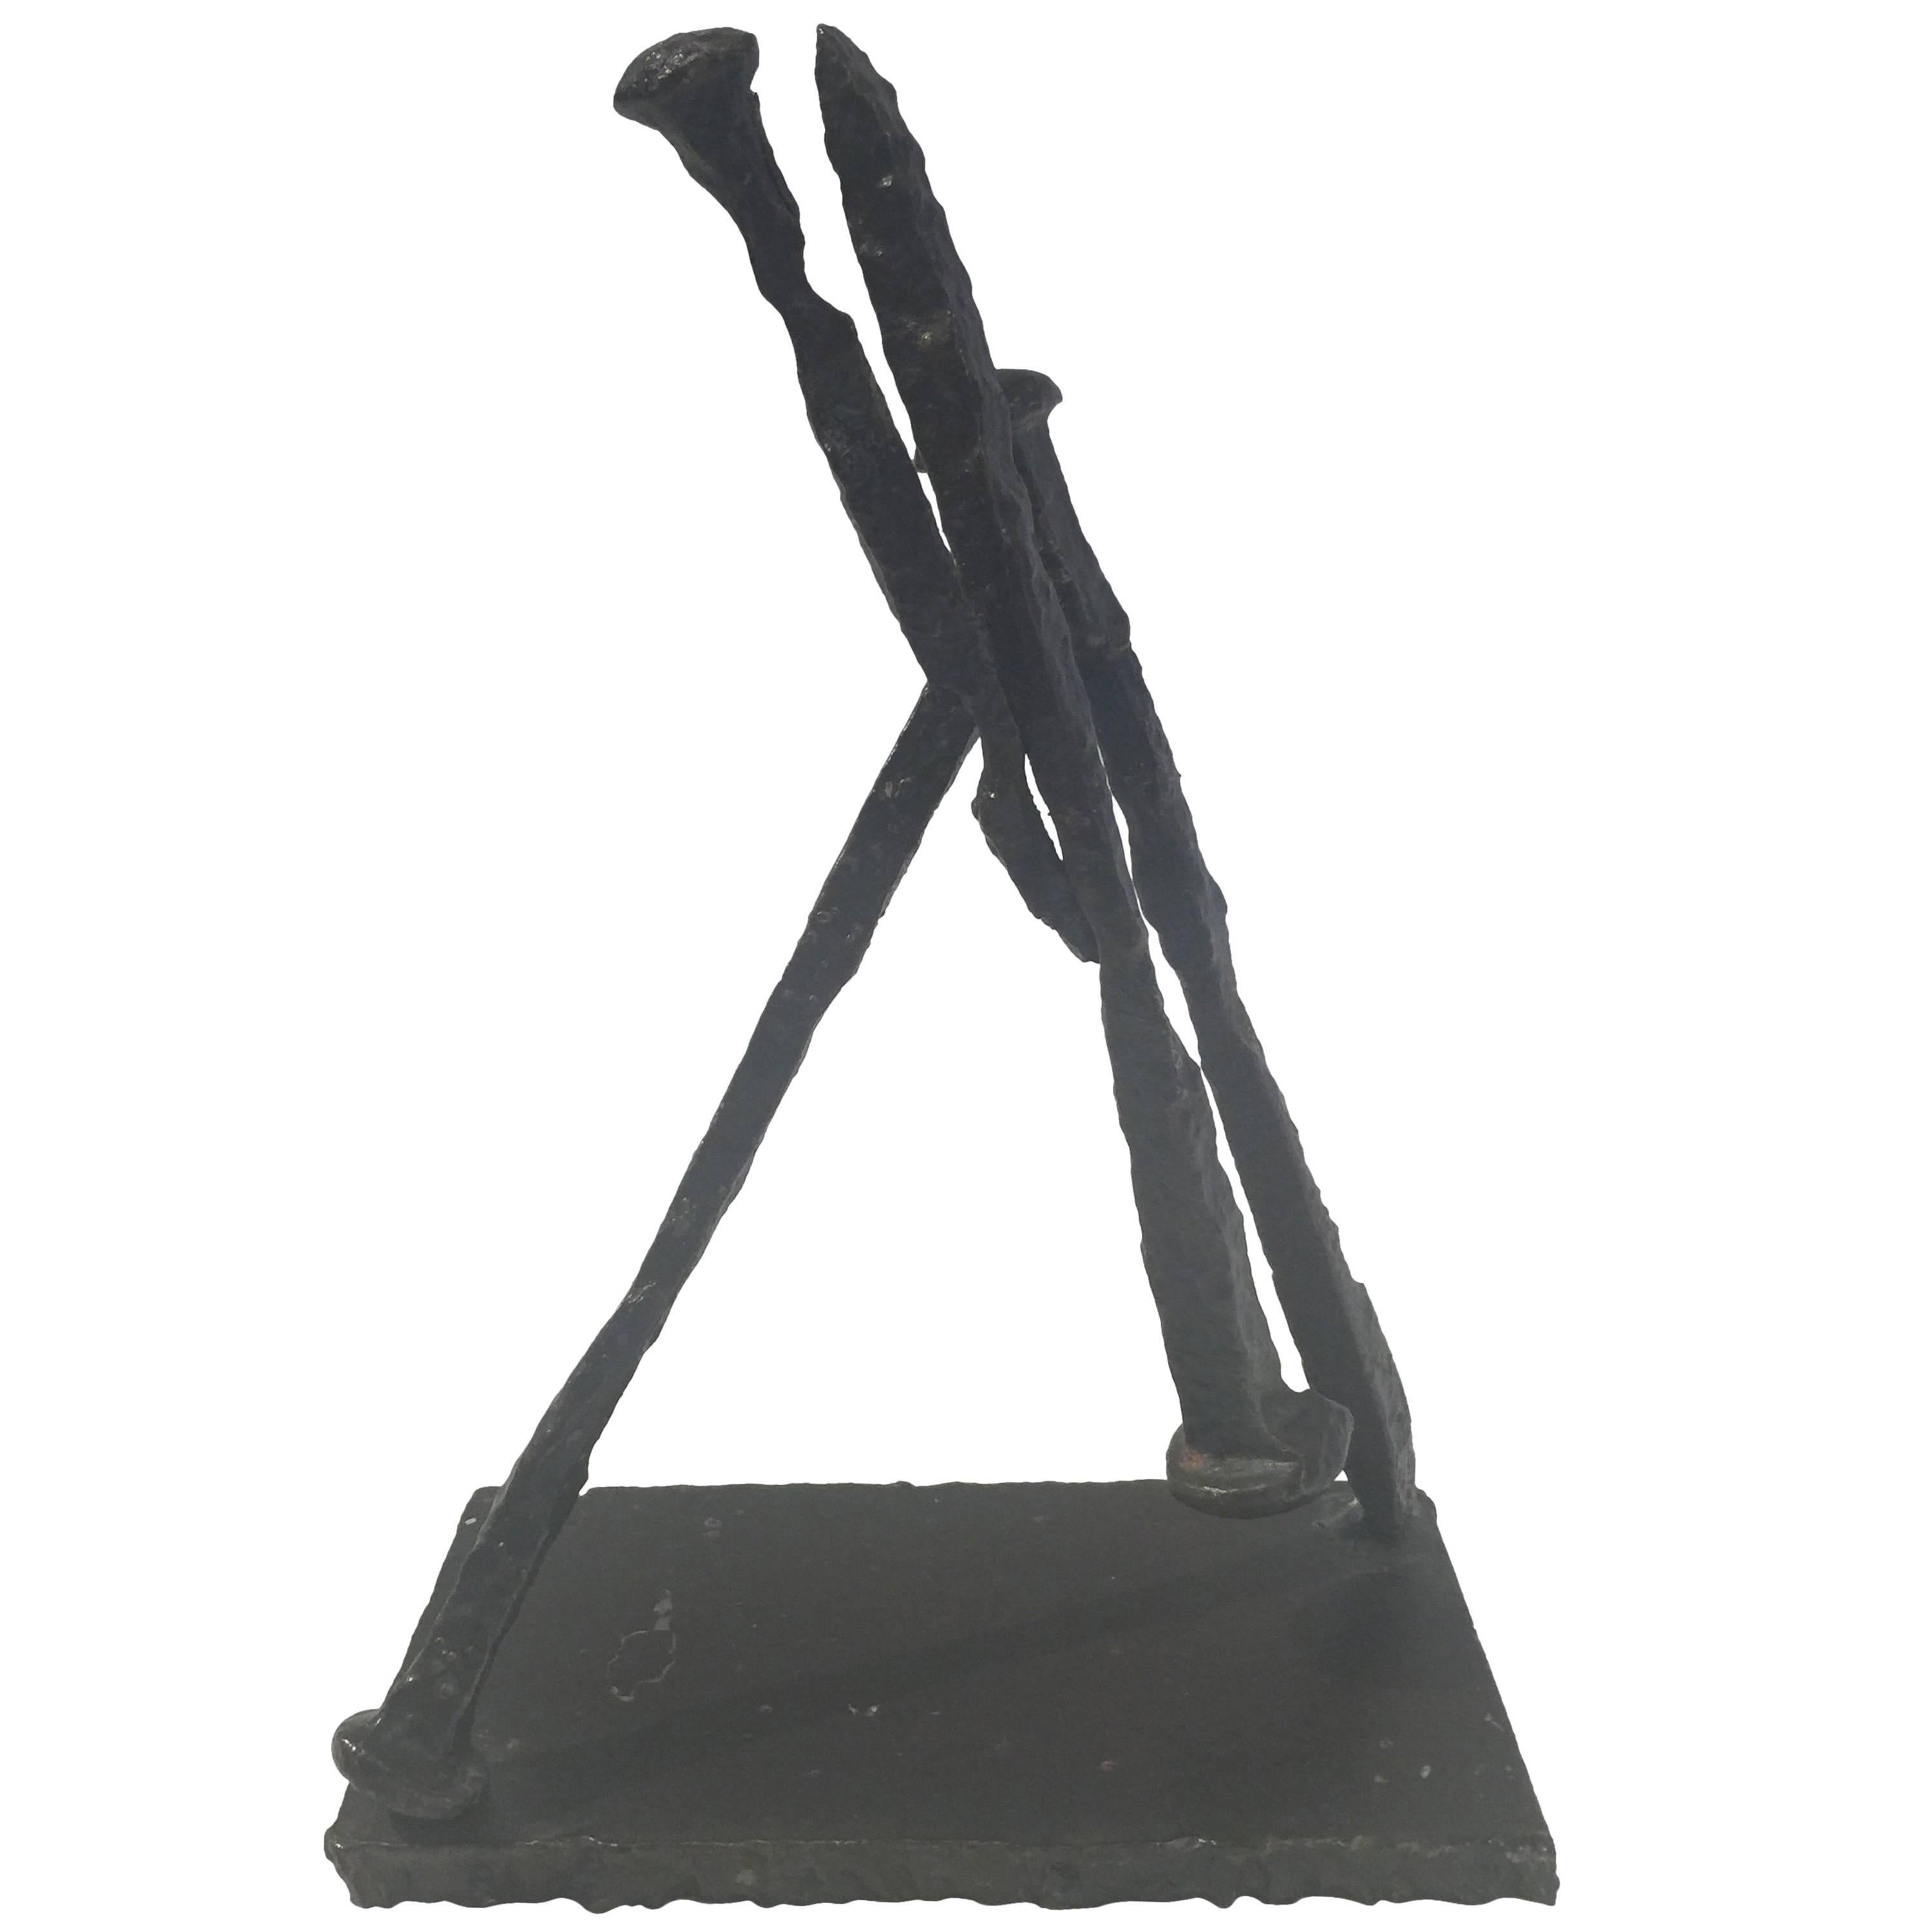 1950s Brutalist Bronze Tabletop Sculpture by Costikyan 'Signed' For Sale